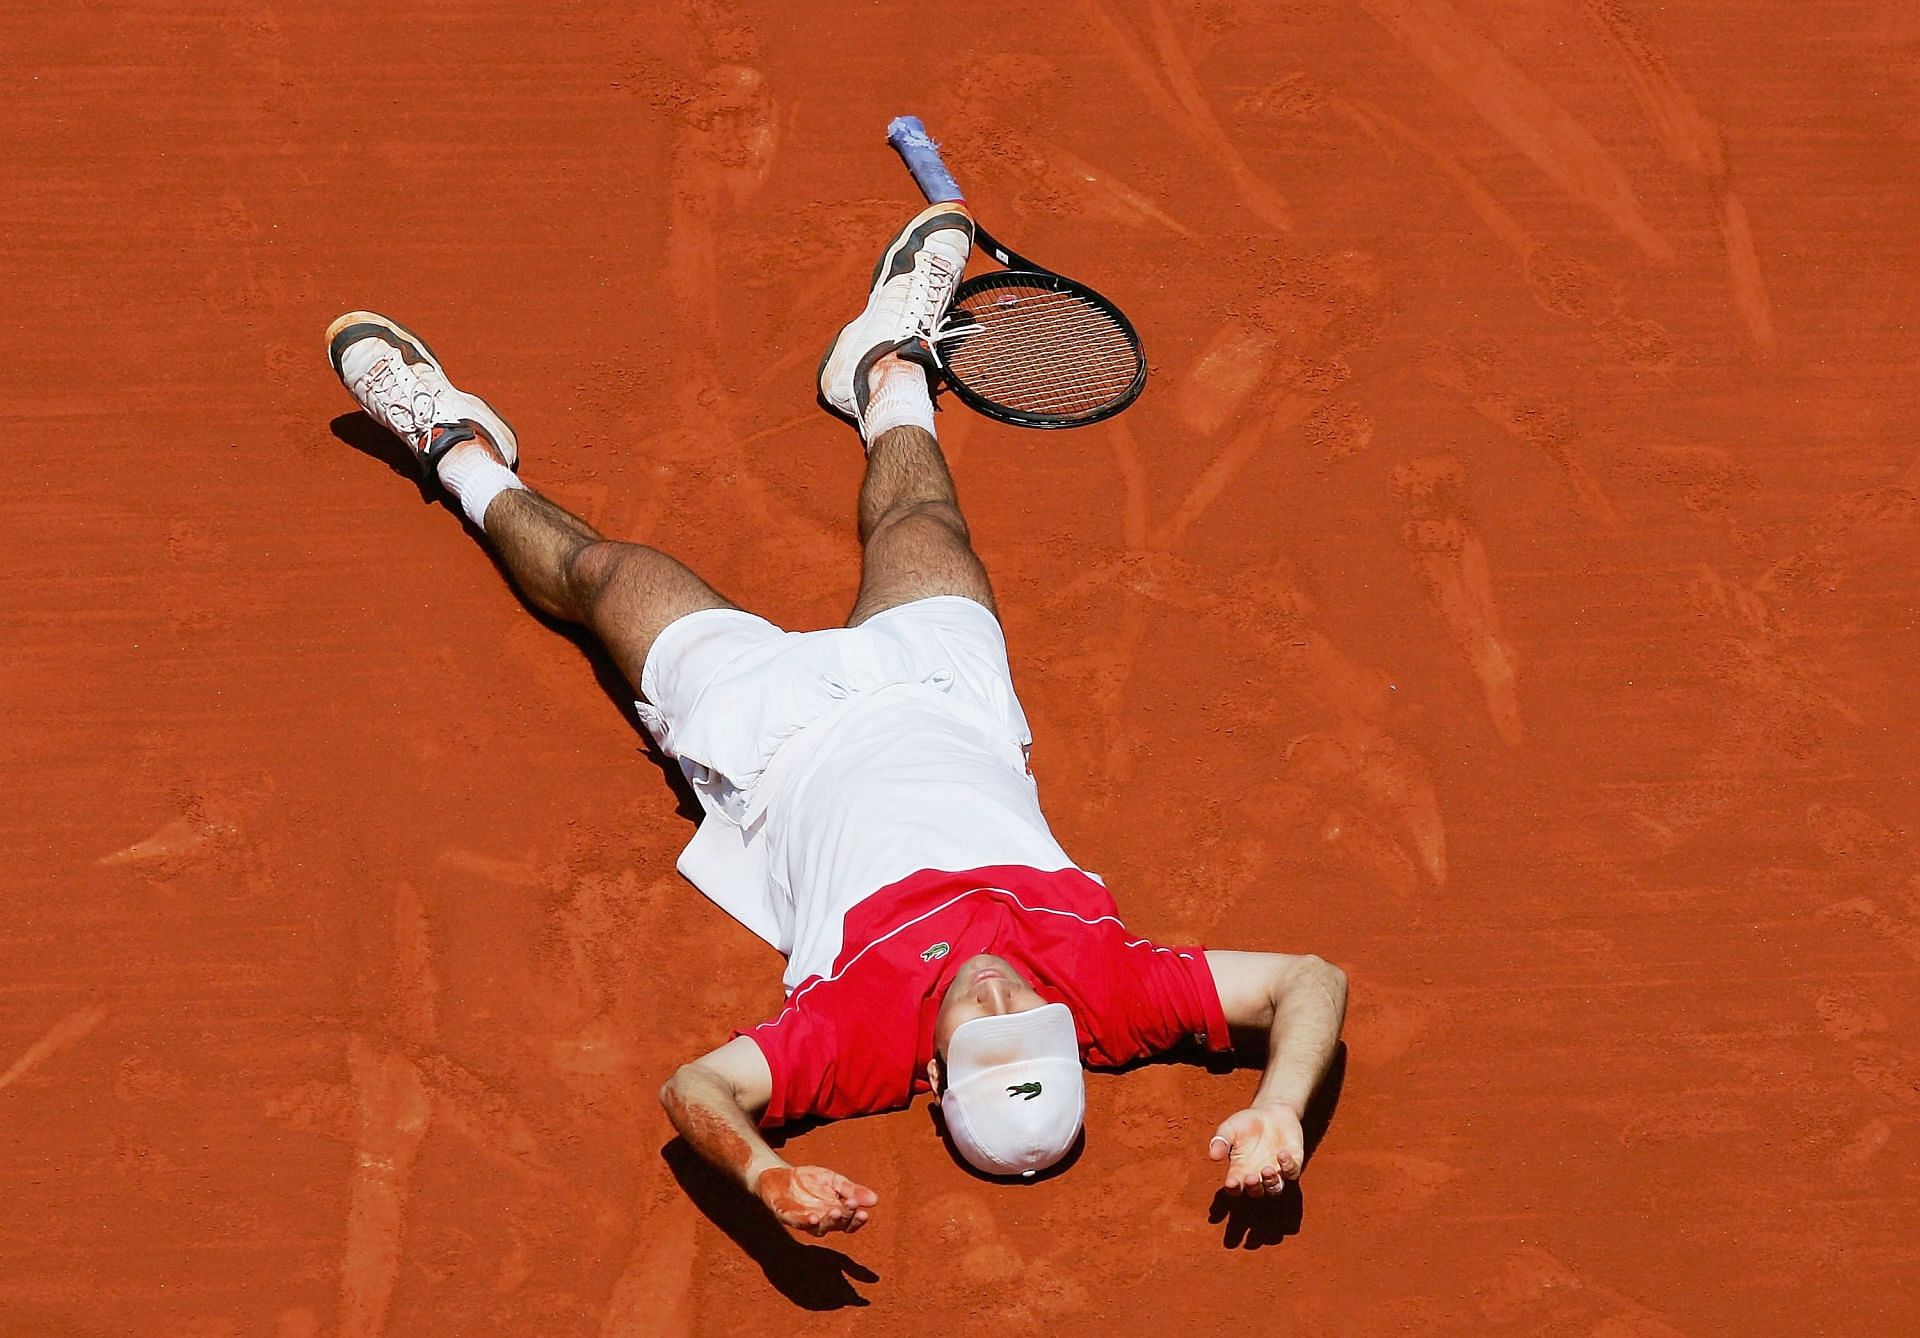 Fabrice Santoro celebrating his win over Arnaud Clement at the 2004 French Open.